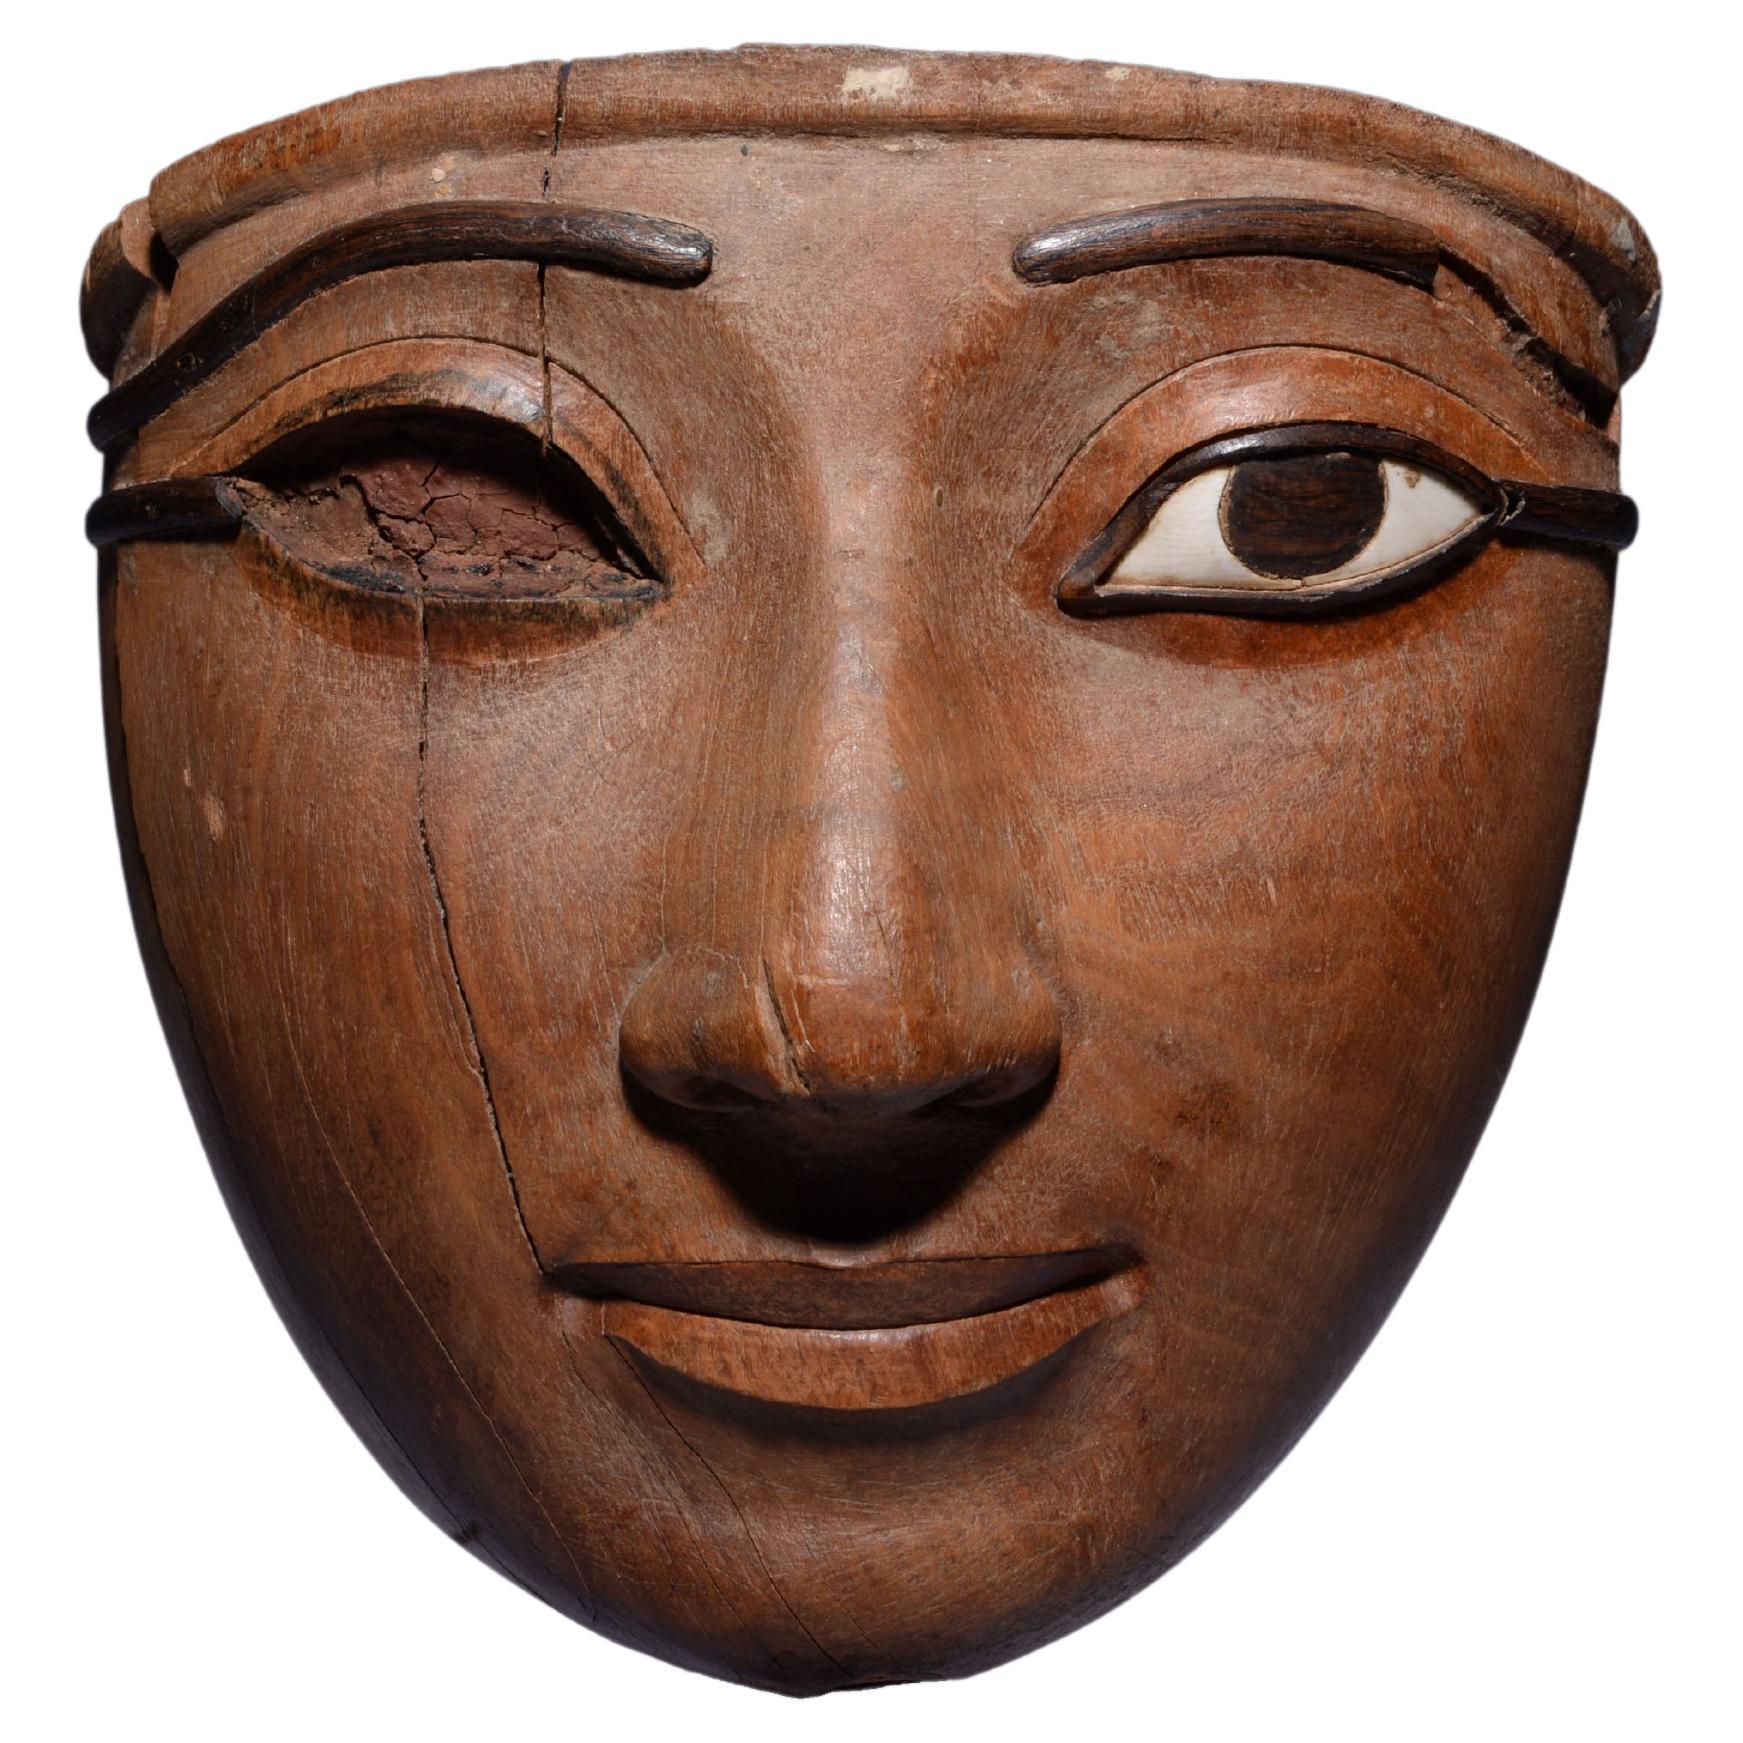 Exceptional Egyptian Sarcophagus Mask